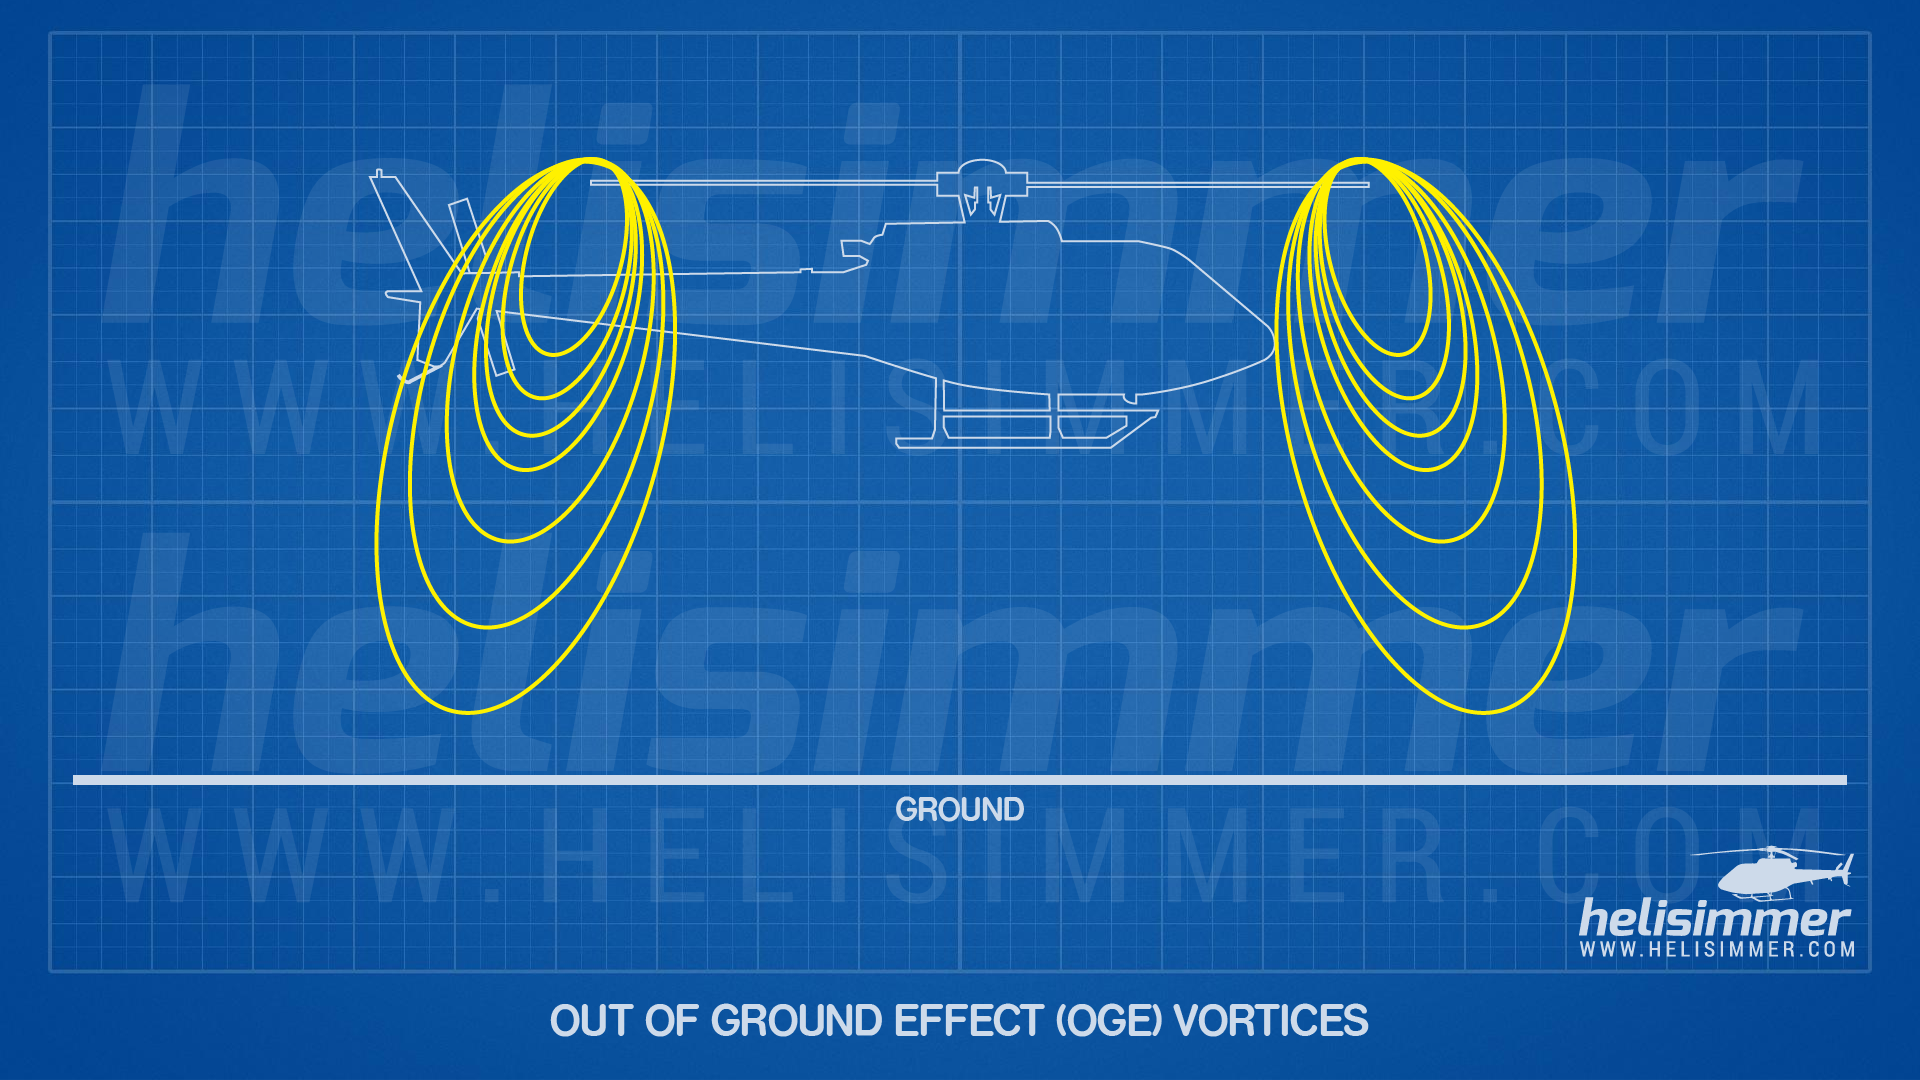 Ground effect - vortices out of ground effect